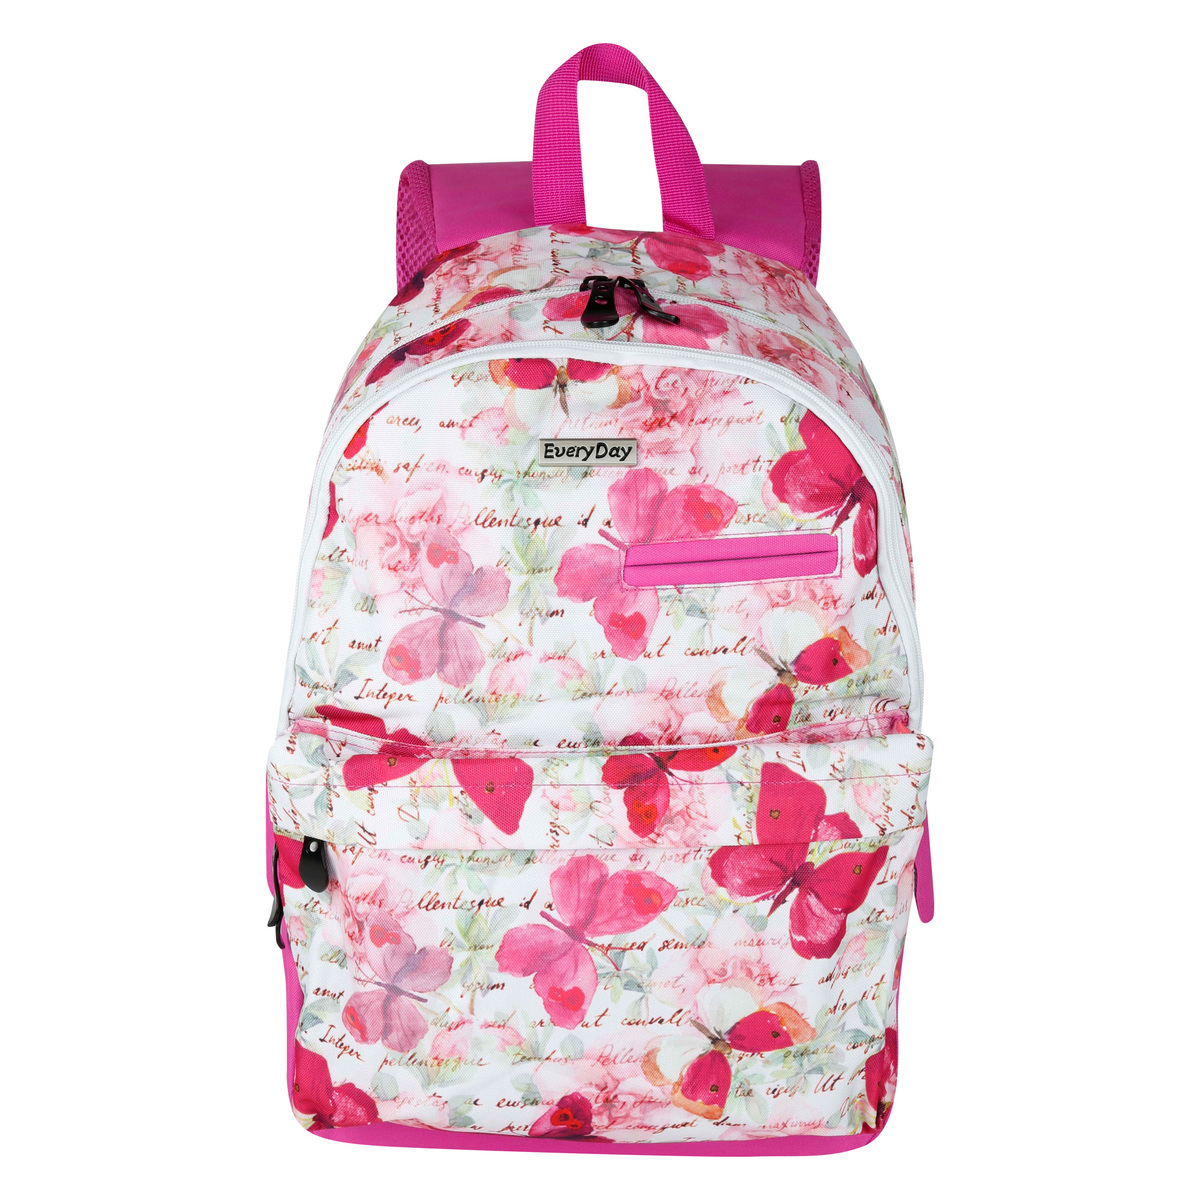 Everyday Backpack 19.5inch Assorted